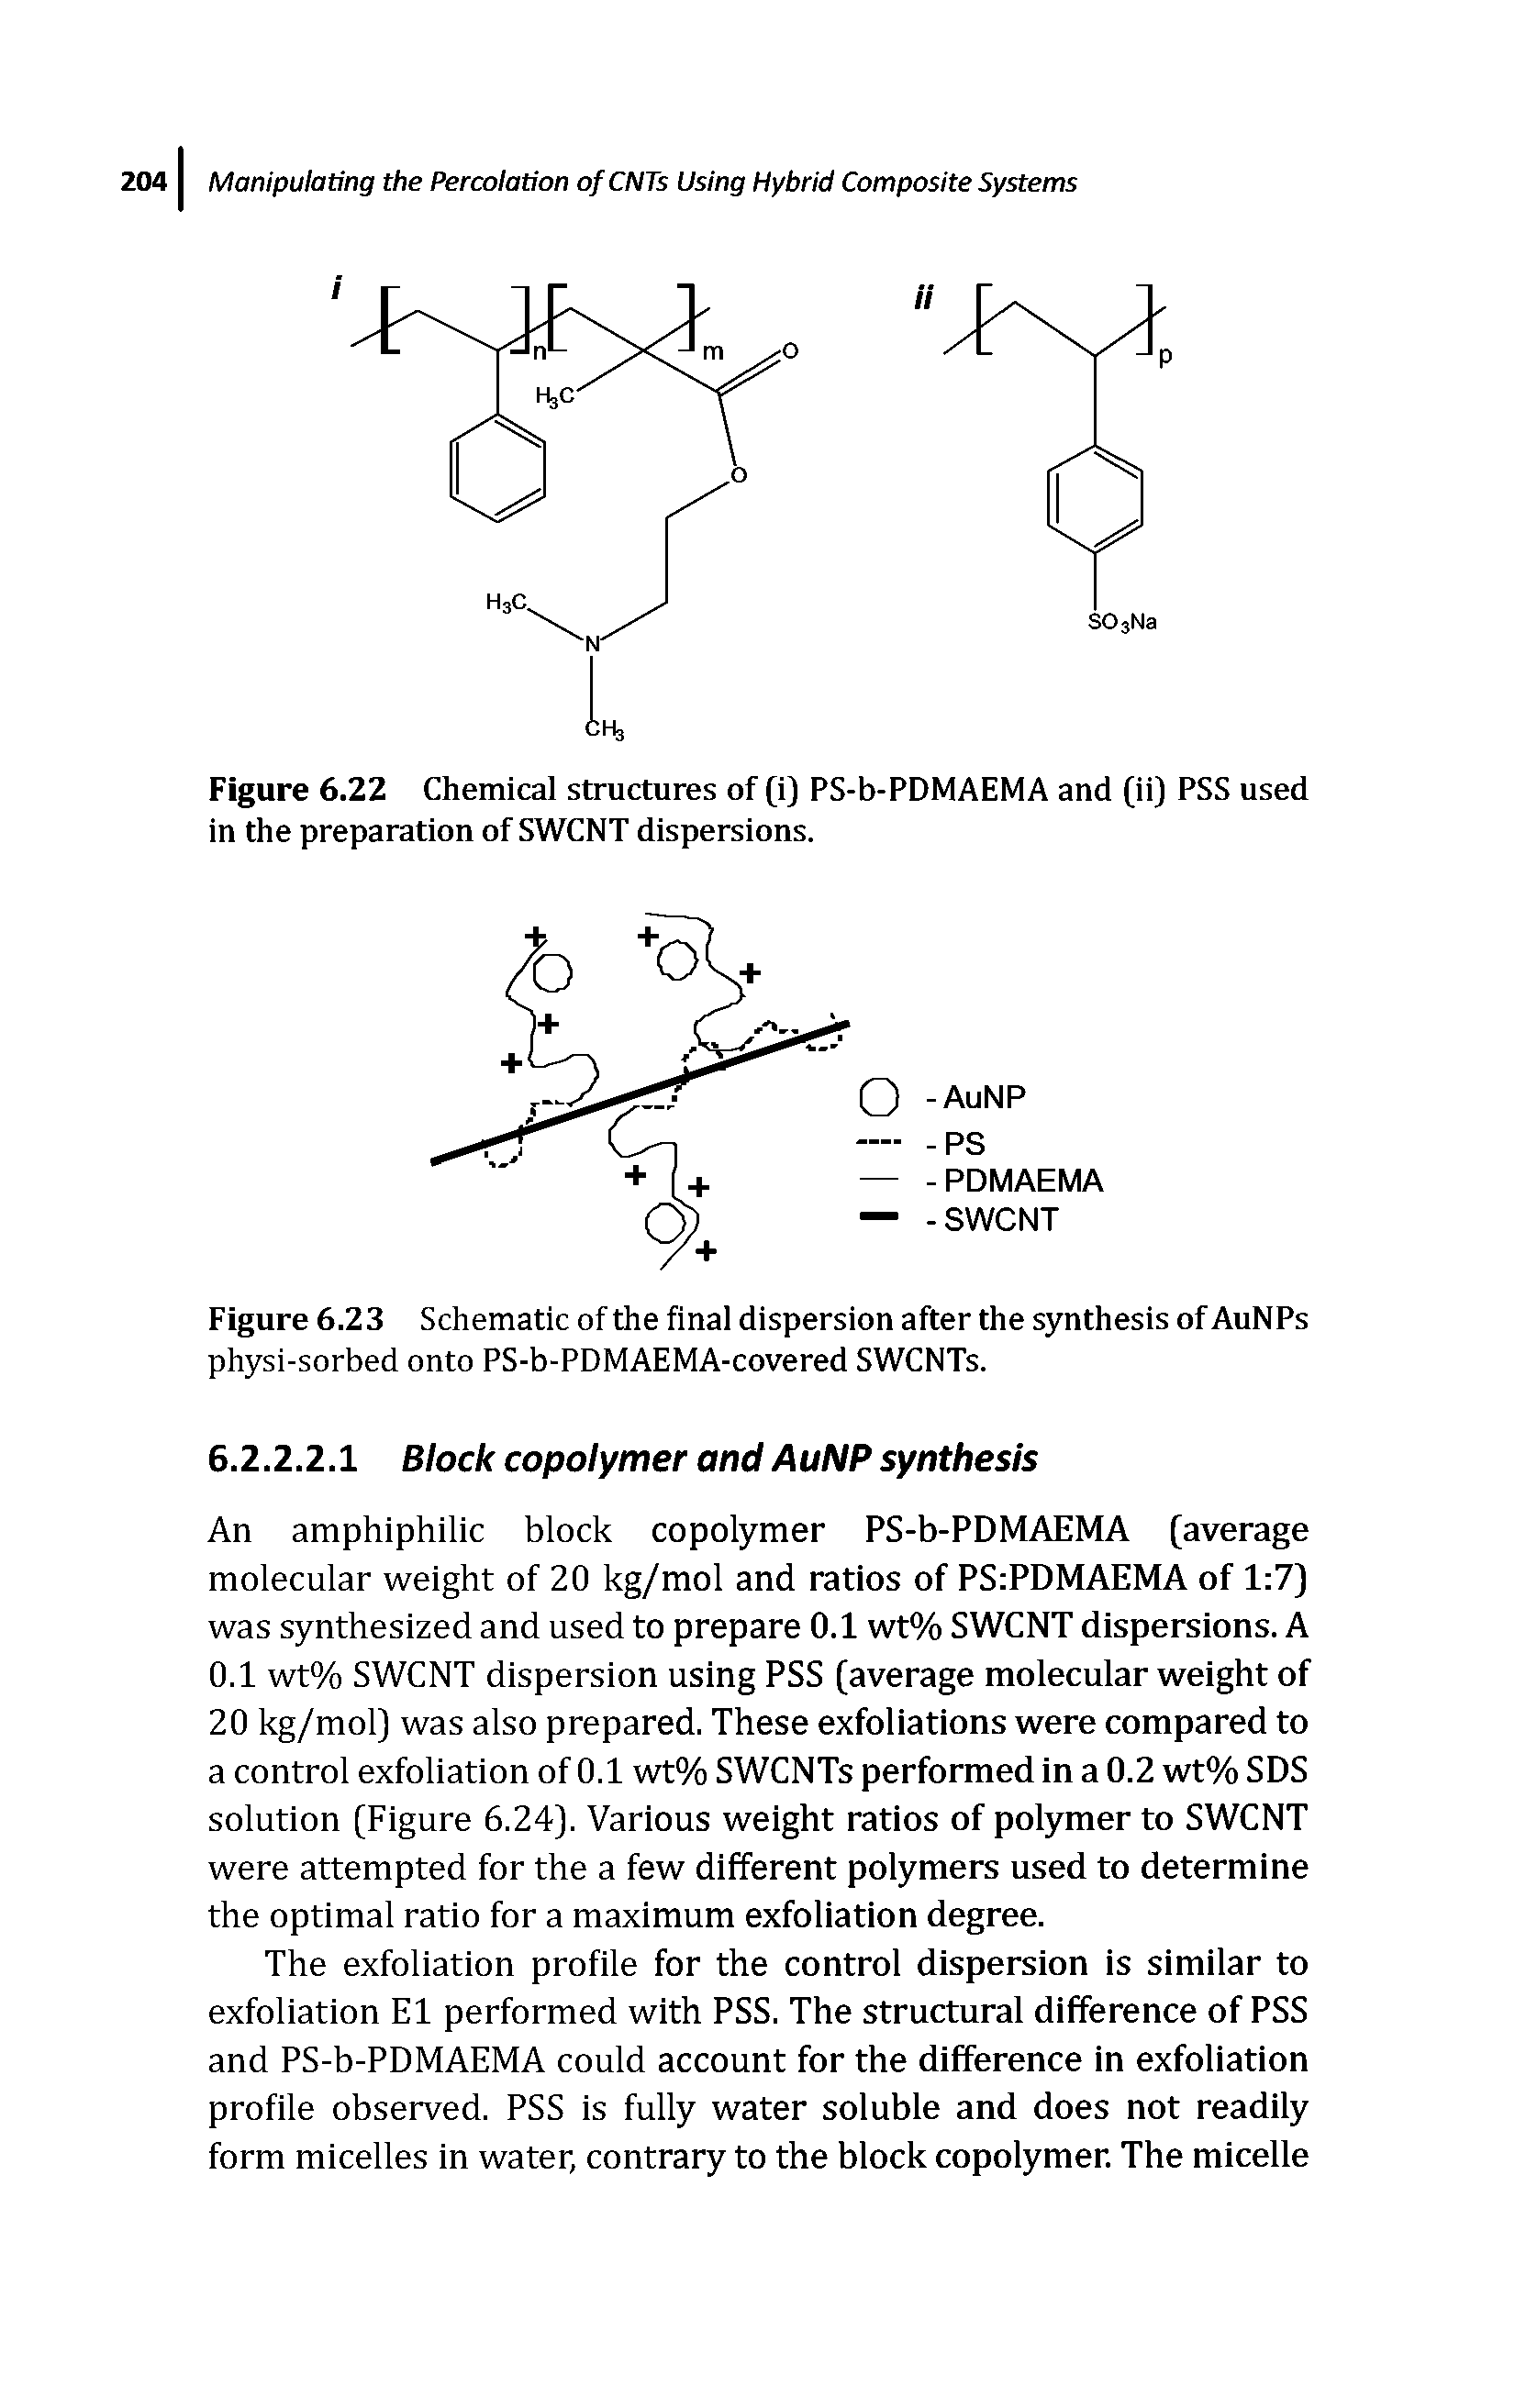 Figure 6.22 Chemical structures of p) PS-b-PDMAEMA and pi) PSS used in the preparation of SWCNT dispersions.